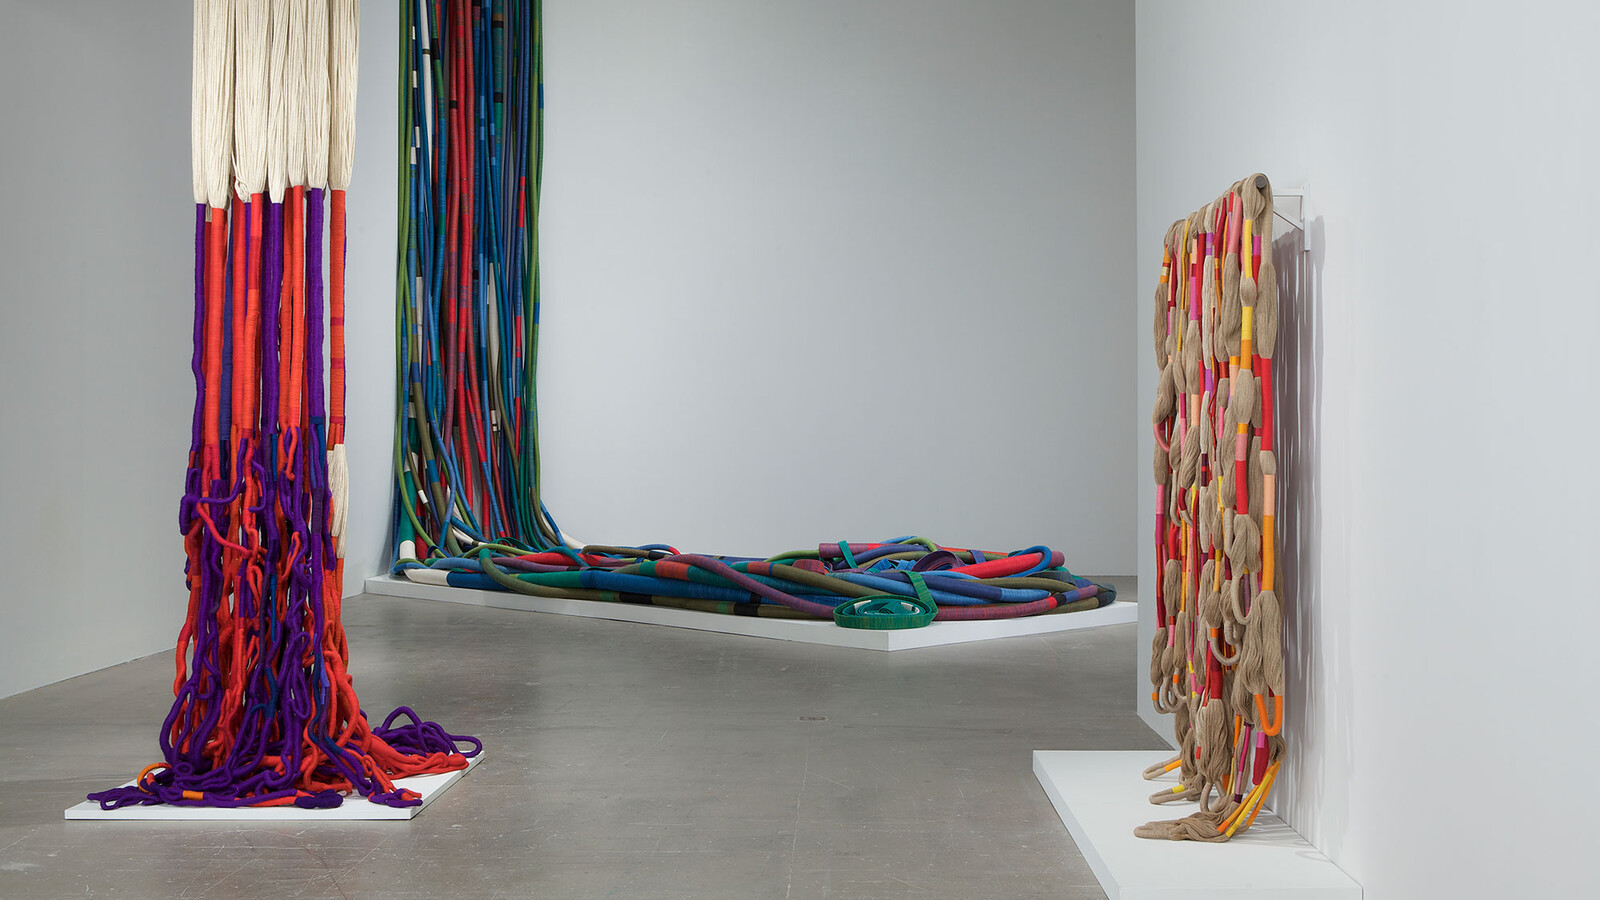 Sheila Hicks: 50 Years | The Pew Center for Arts & Heritage